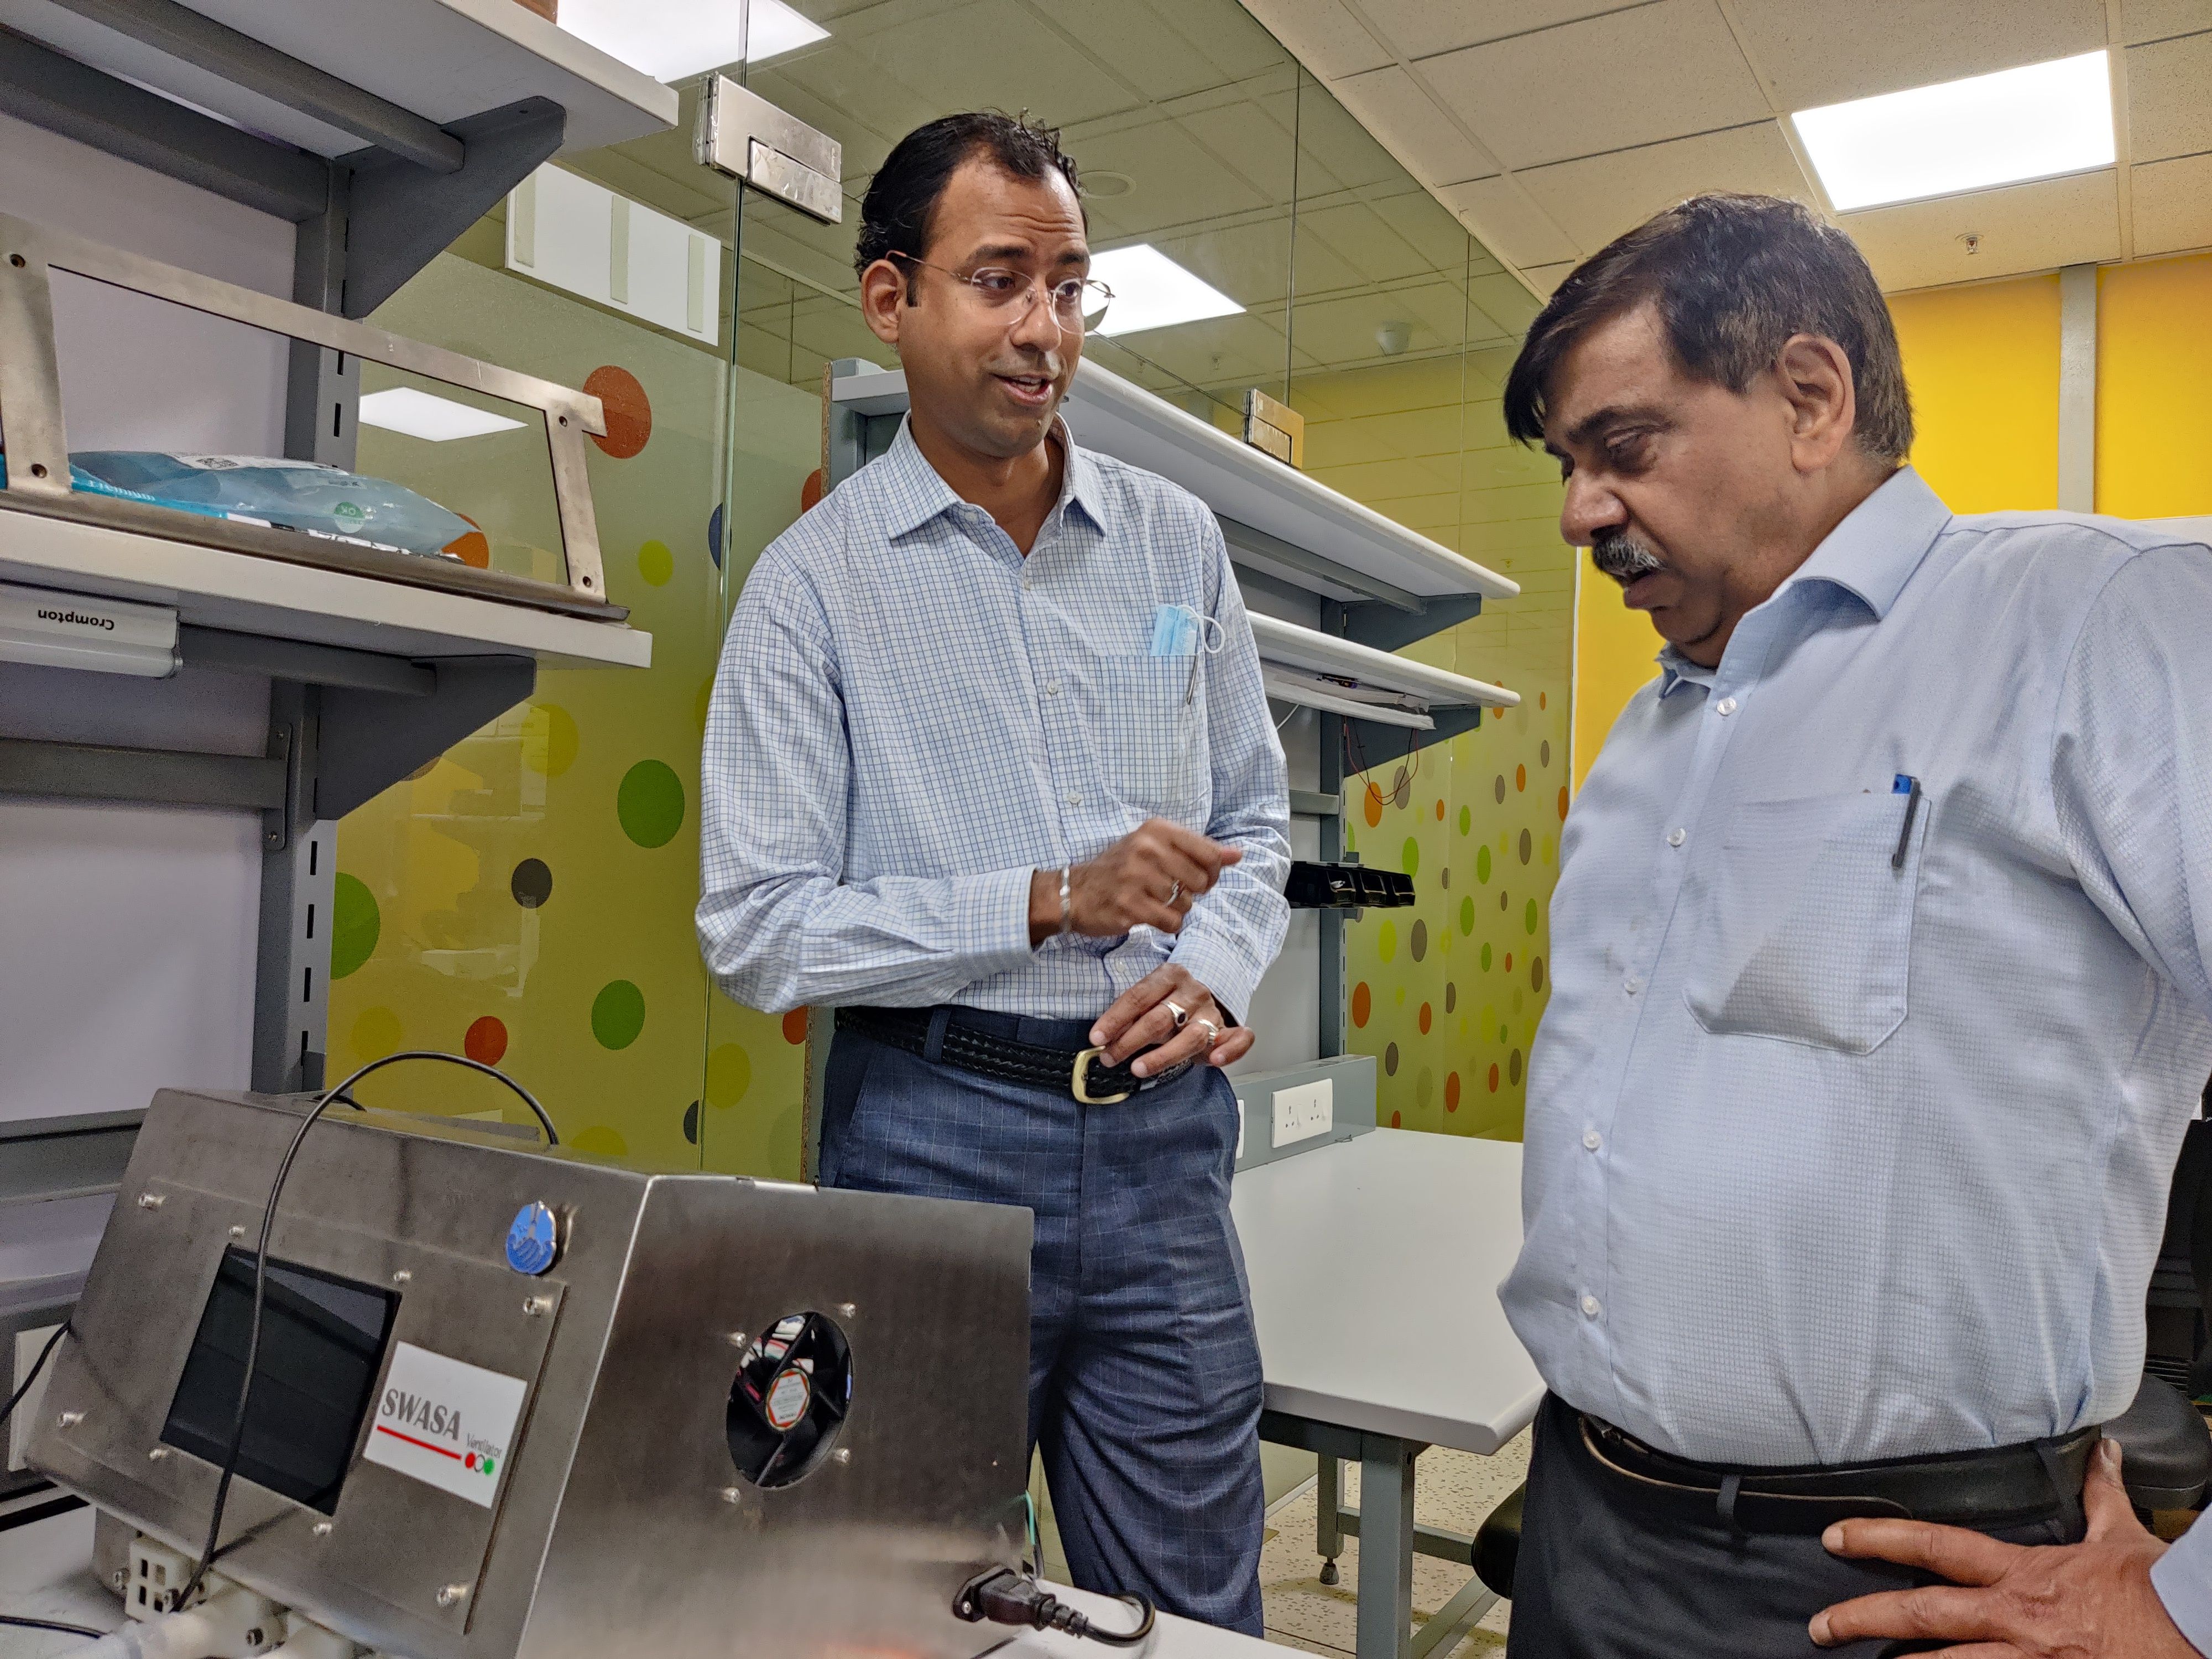 Mr. Upendra Prasad Singh, Minister of Textiles, discussed AMTZ Medical Care Technology and Health Technology in India with Dr. Jitendra Sharma at AMTZ